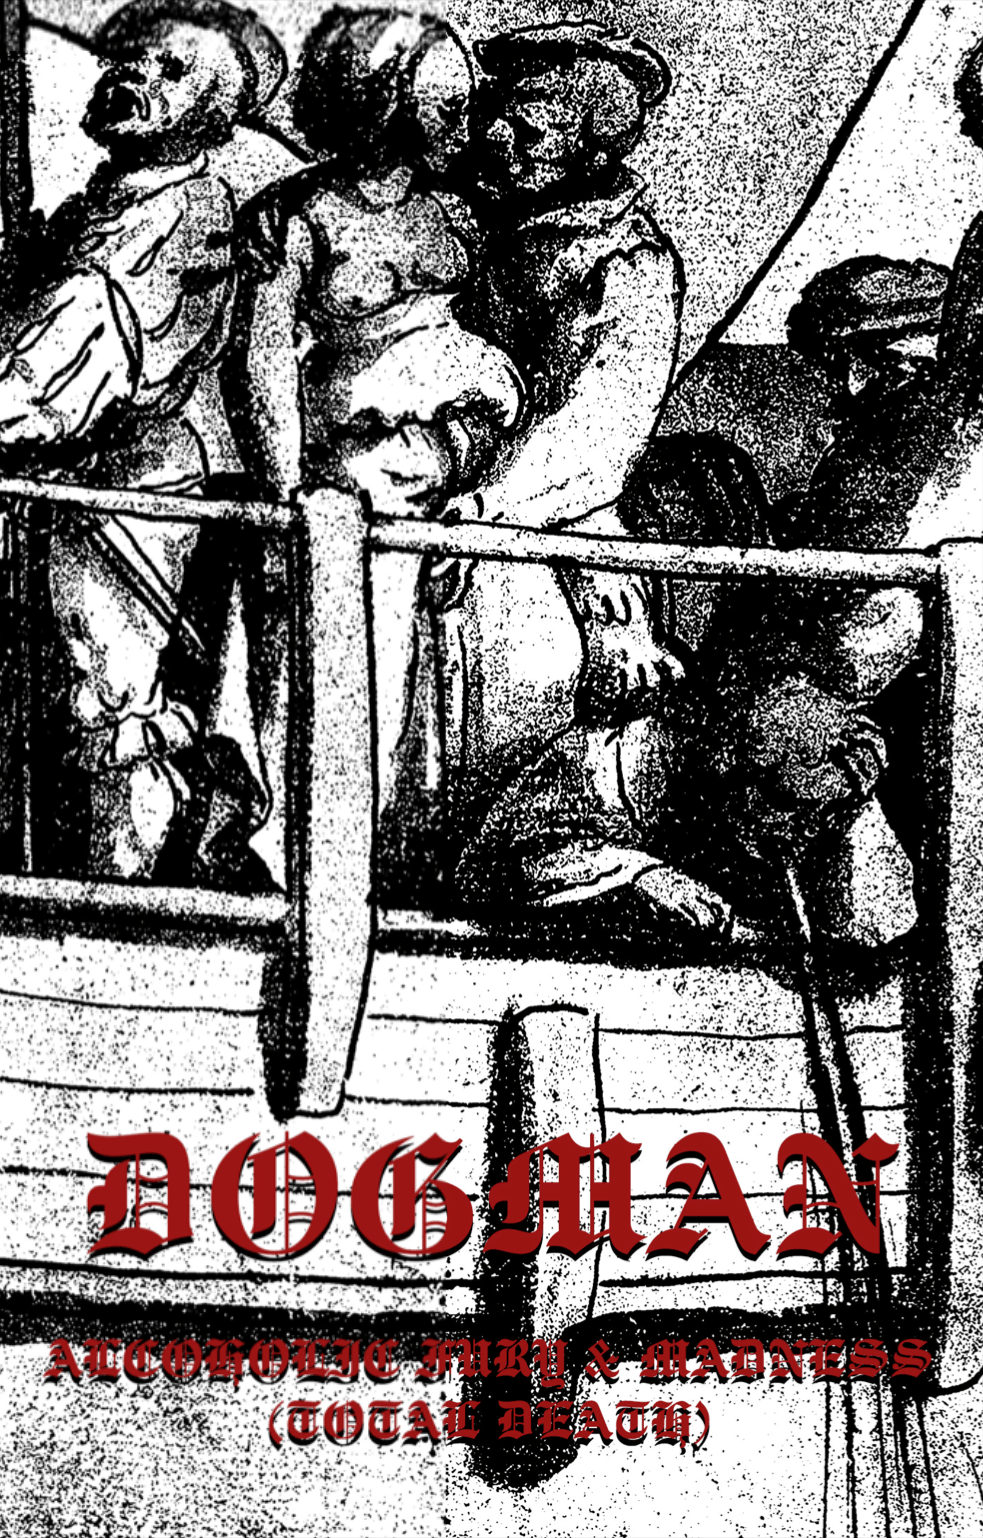 Image of Dogman - Alcoholic Fury & Madness (Total Death) CS